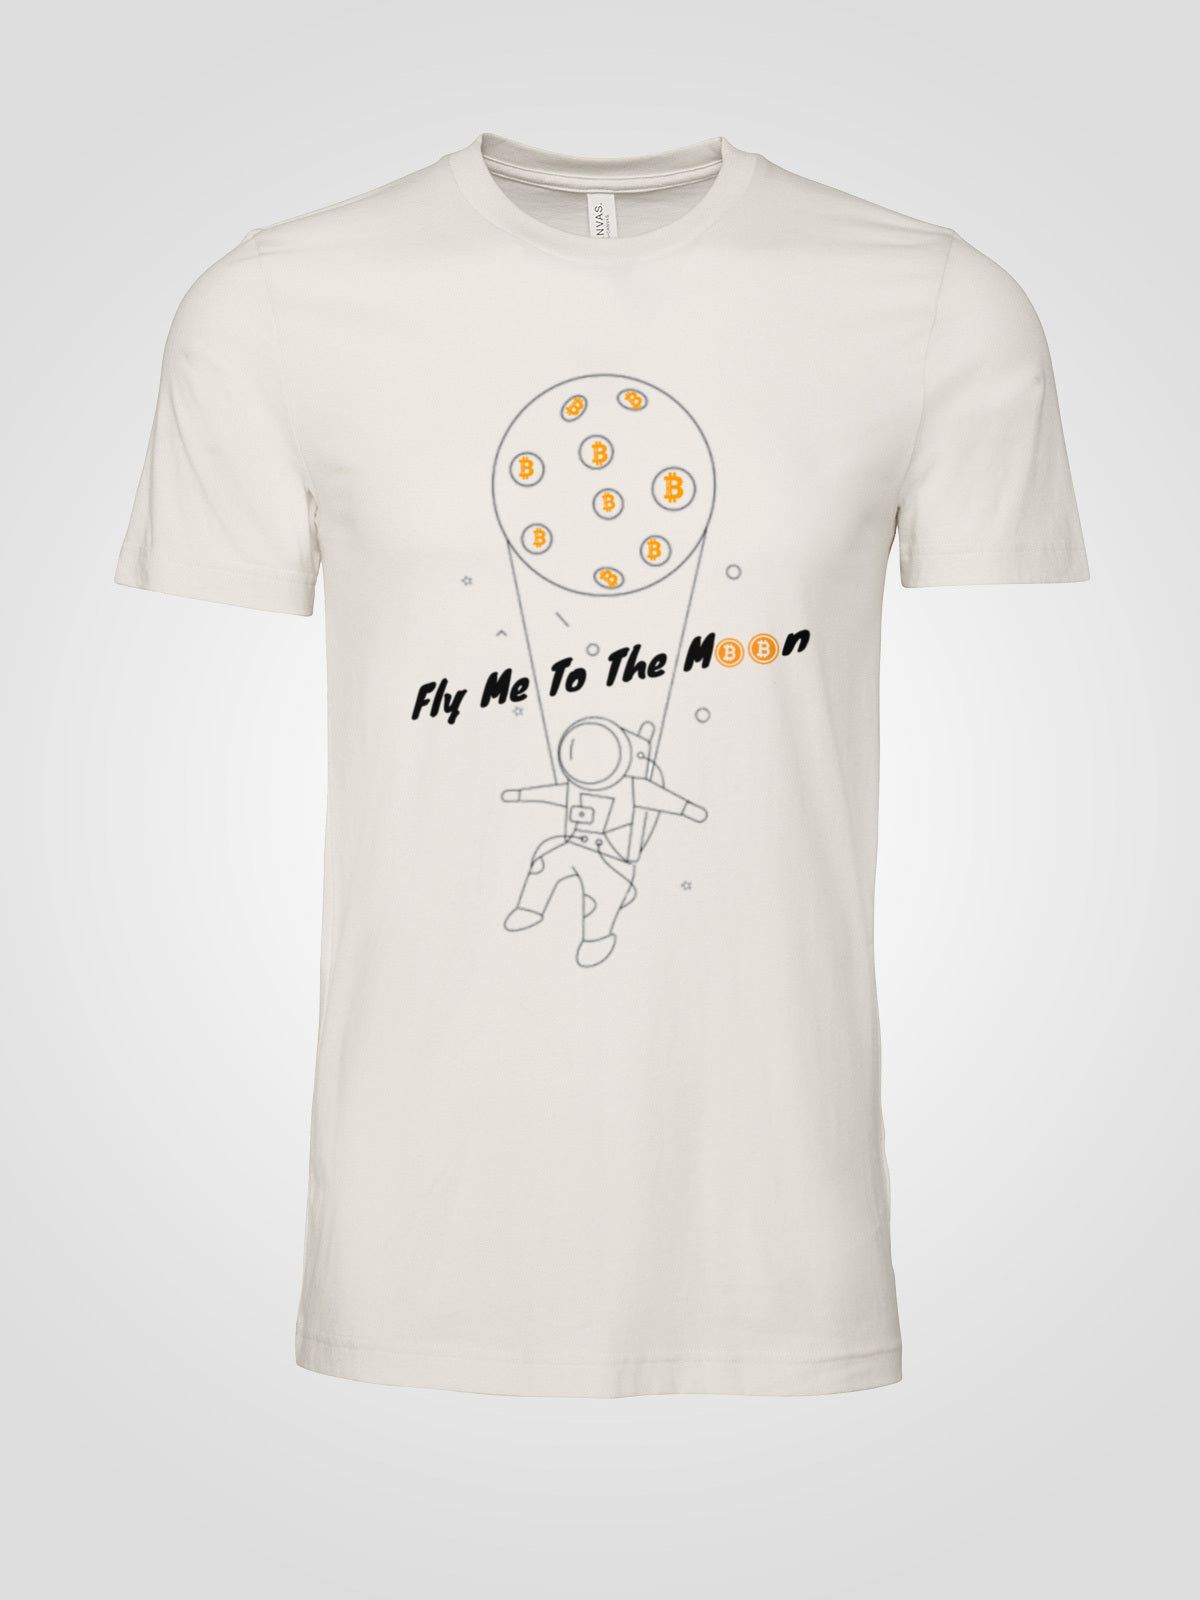 Bitcoin Fly Me To The Moon T Shirt Cryptoclothingus